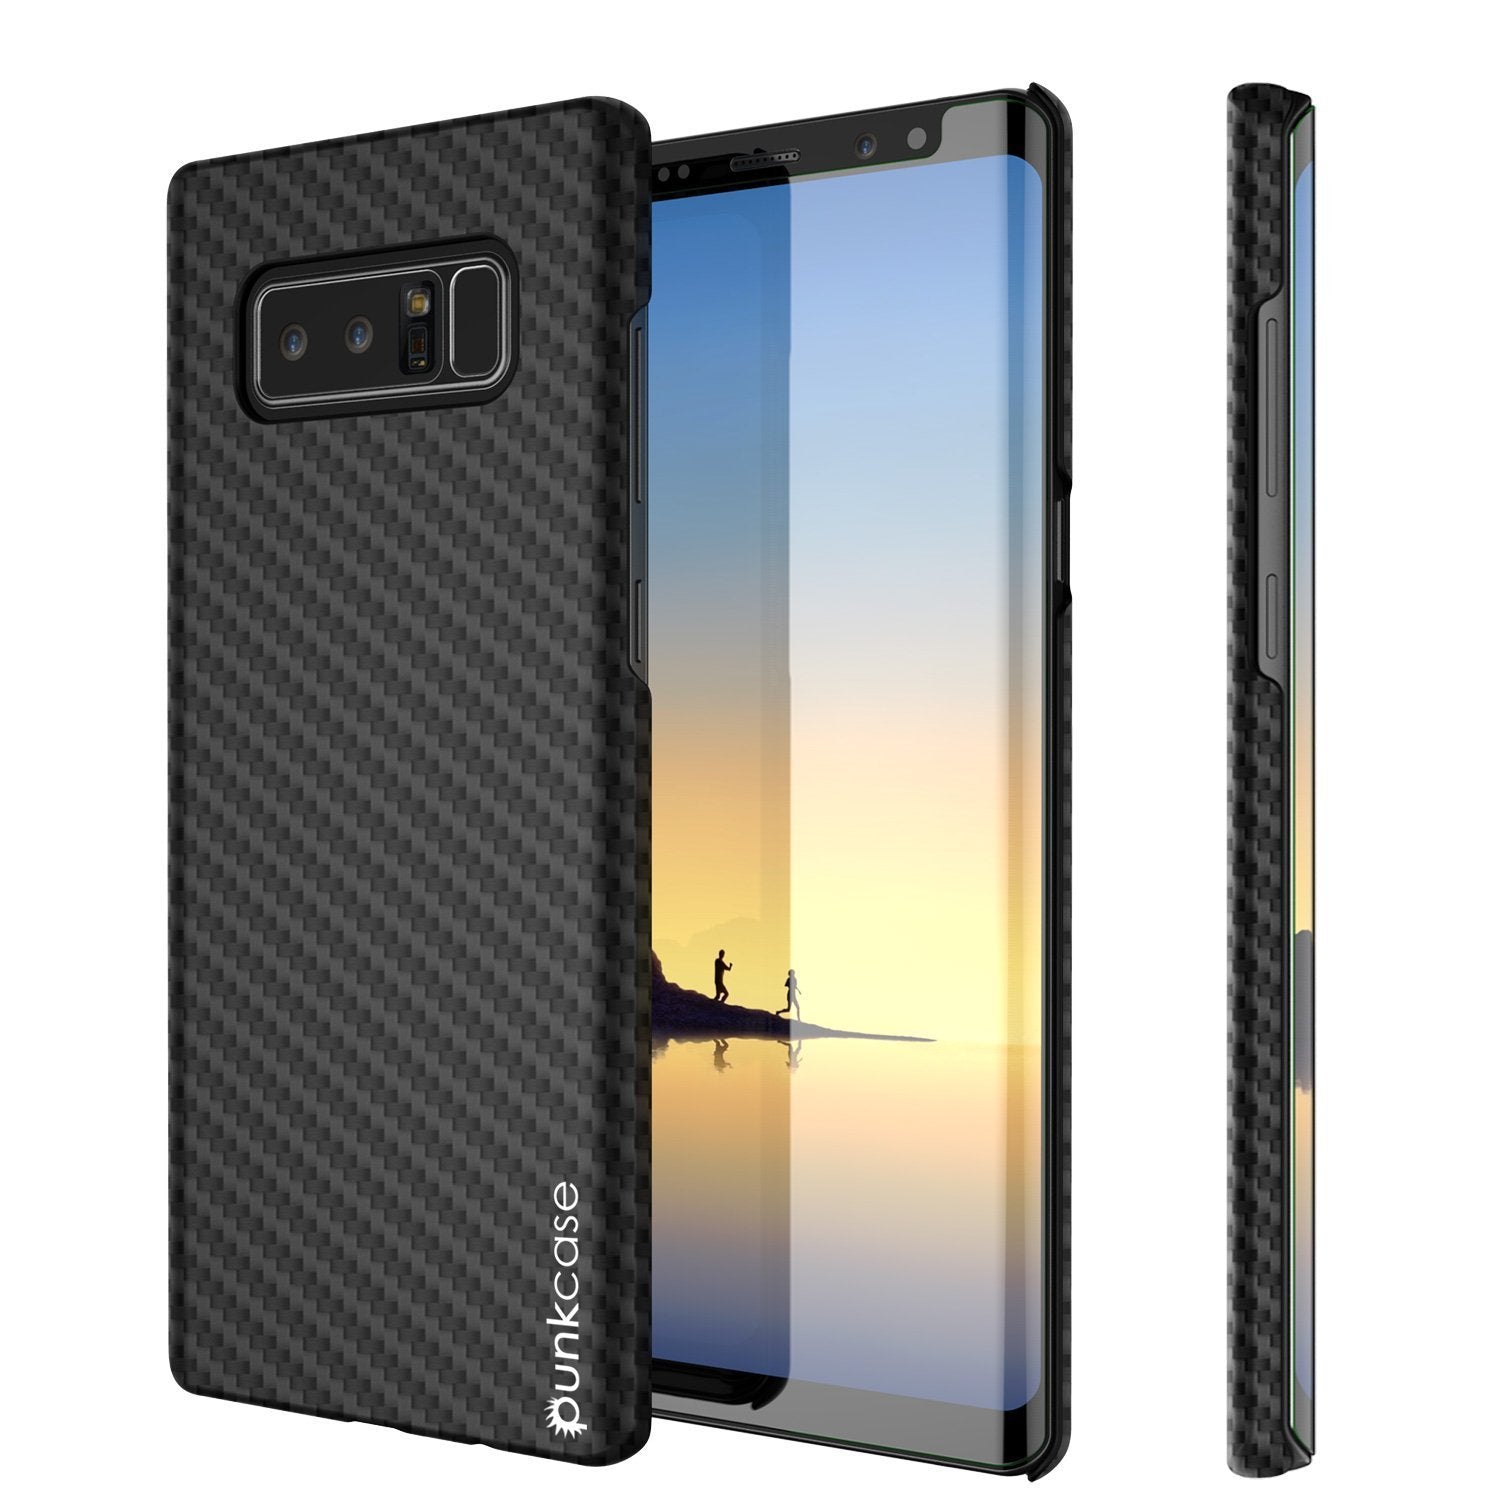 Galaxy Note 8 Case, Punkcase CarbonShield, Heavy Duty & Ultra Thin 2 Piece Dual Layer PU Leather Cover [shockproof][non slip] with PUNKSHIELD Screen Protector for Samsung Note 8 [jet black] - PunkCase NZ